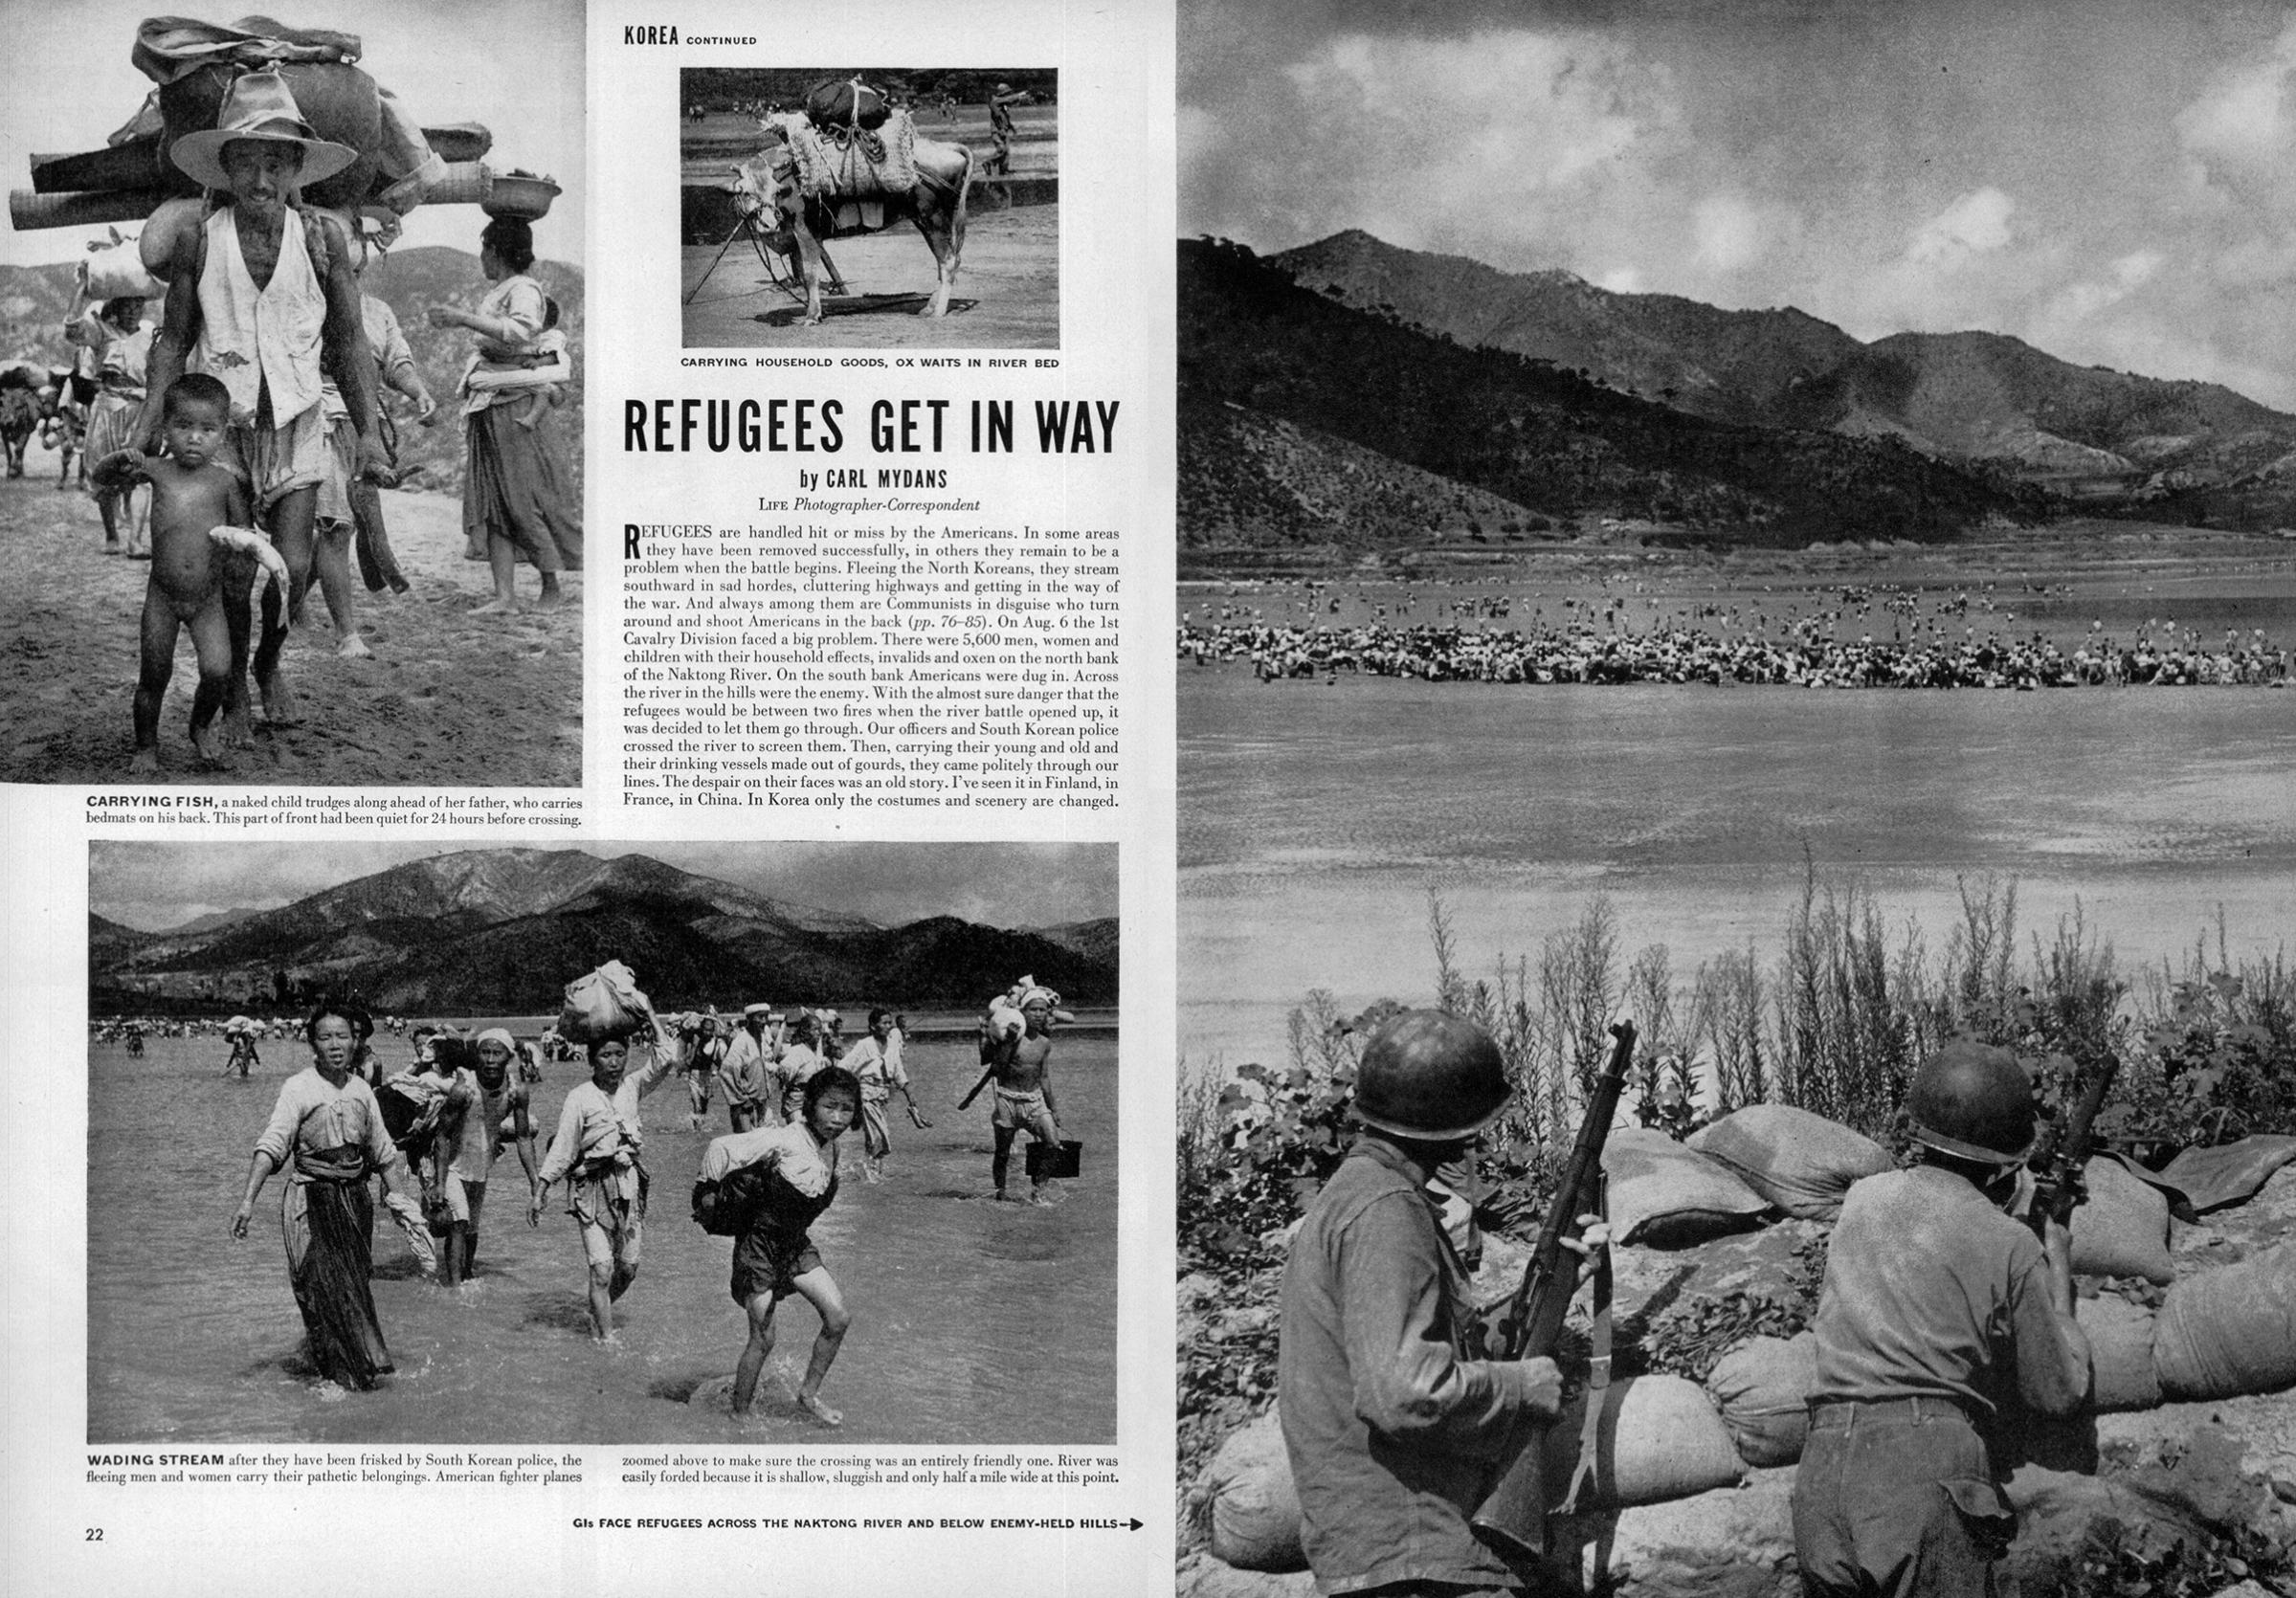 "Refugees Get In Way"—from the April 21, 1950 issue of LIFE magazine.